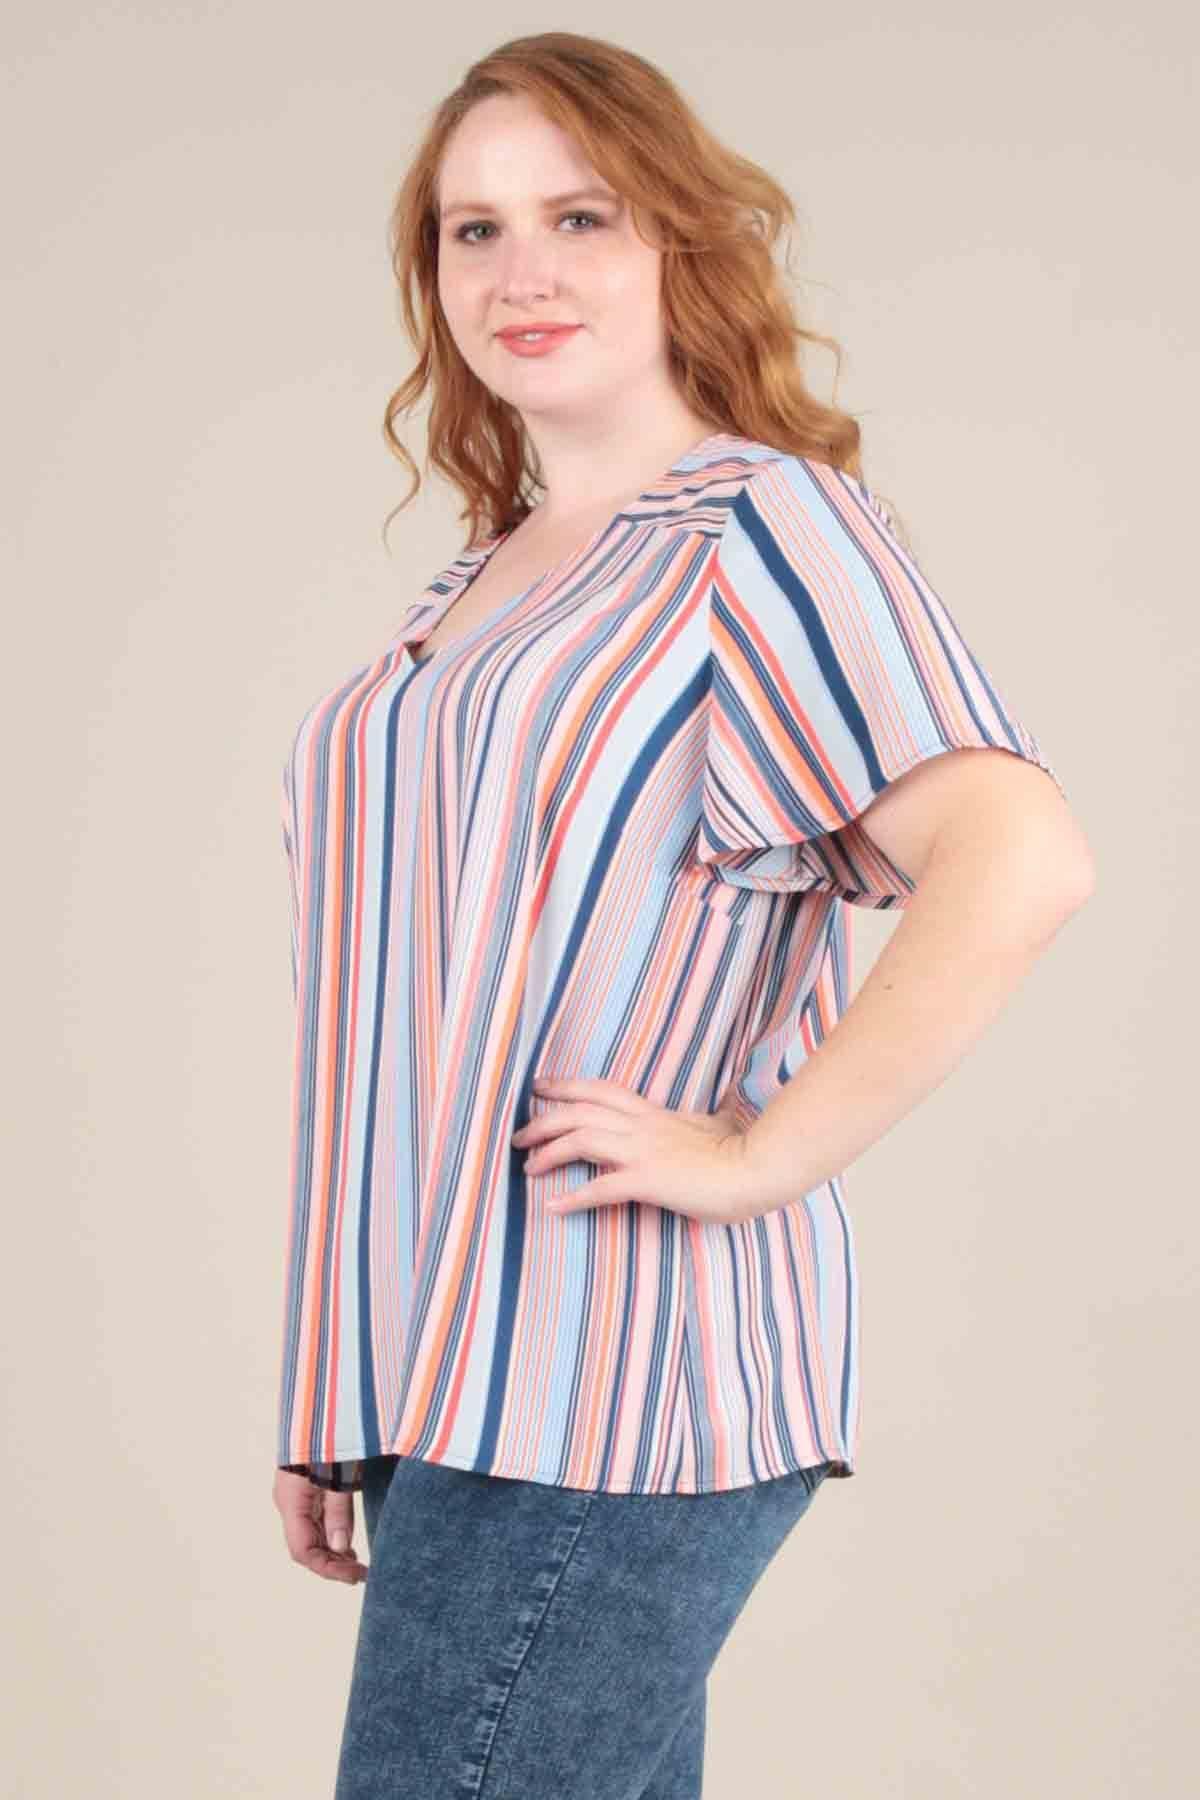 Diane Vertical Logo - Diane Vertical Striped Top. Women's Plus Size Tops. SKIES ARE BLUE